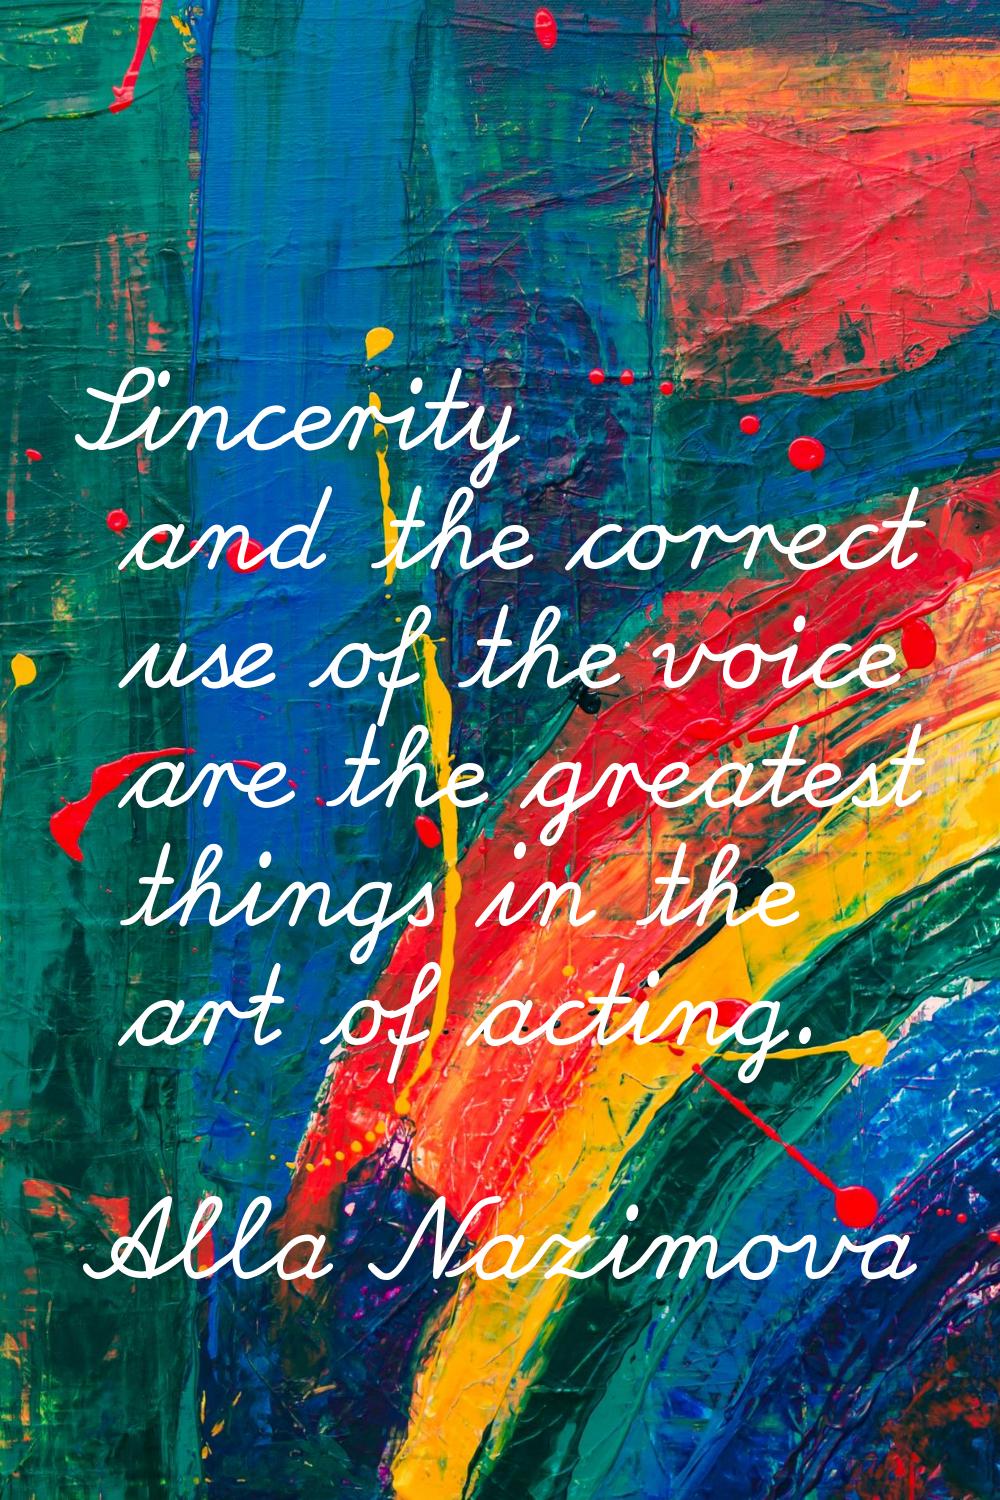 Sincerity and the correct use of the voice are the greatest things in the art of acting.